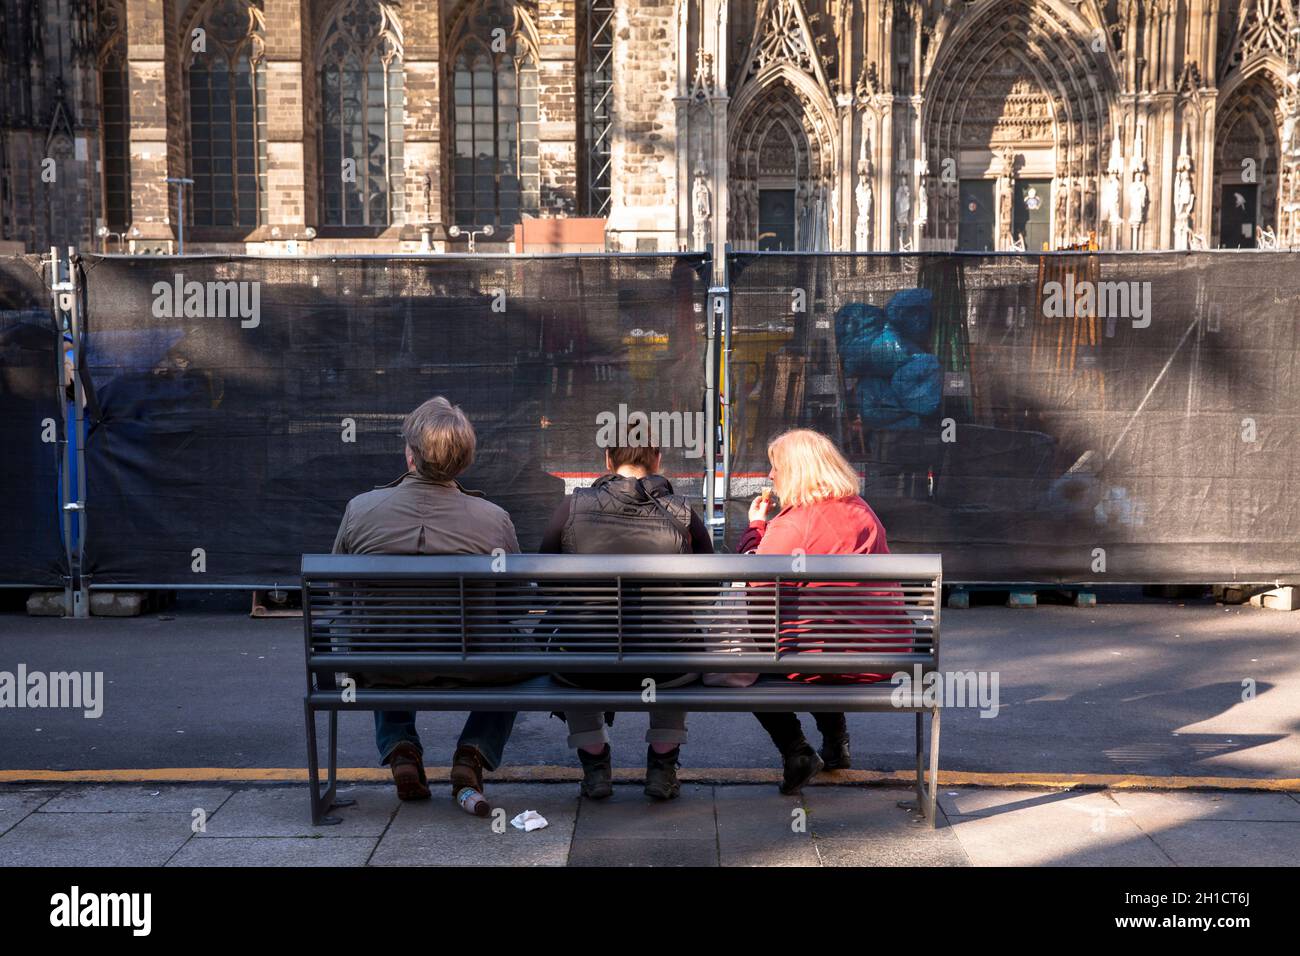 people sitting on a bench in front of a construction fence at Roncalliplatz near the cathedral, Cologne, Germany.  Menschen sitzen auf einer Bank vor Stock Photo